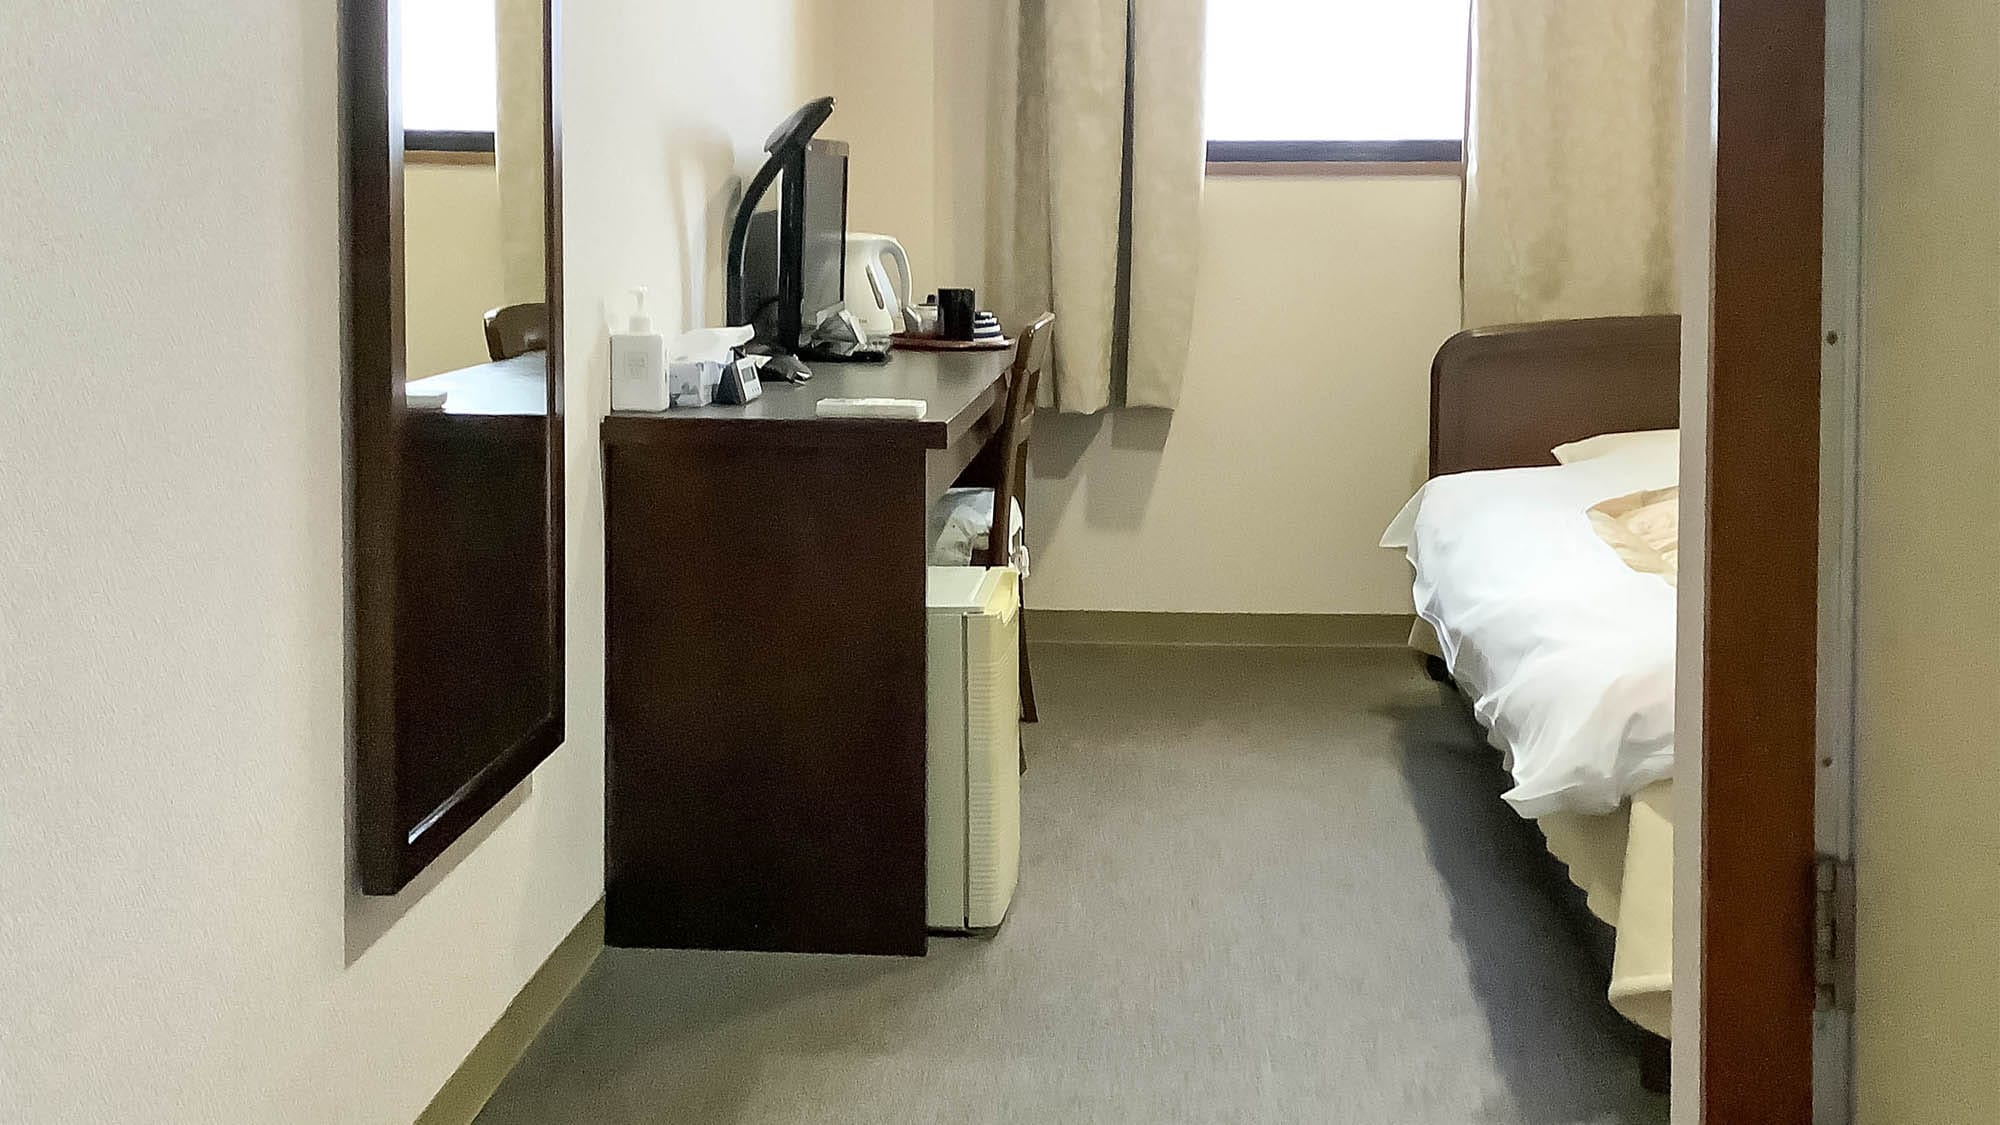 ・ [Single room] It is also recommended for consecutive nights with your luggage spread out.